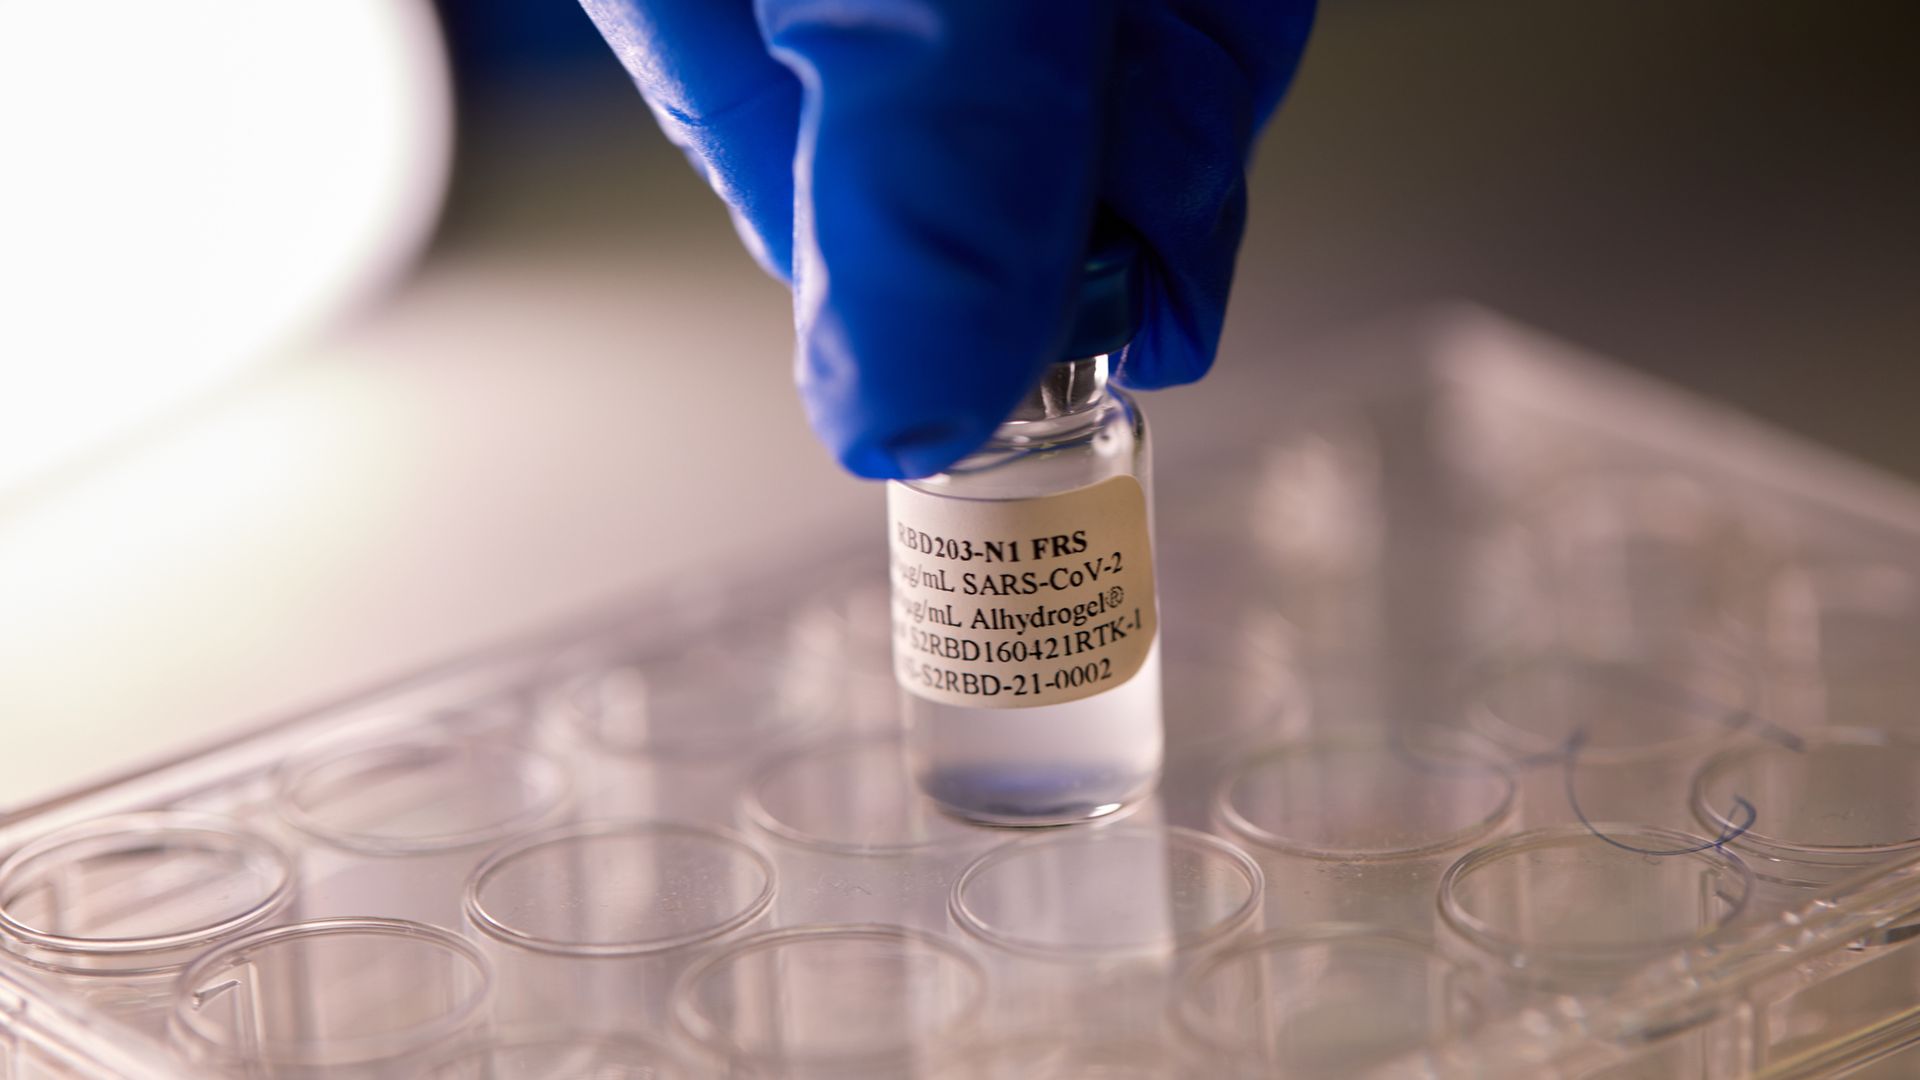 A blue glove holds a vial of the Corbevax vaccine.